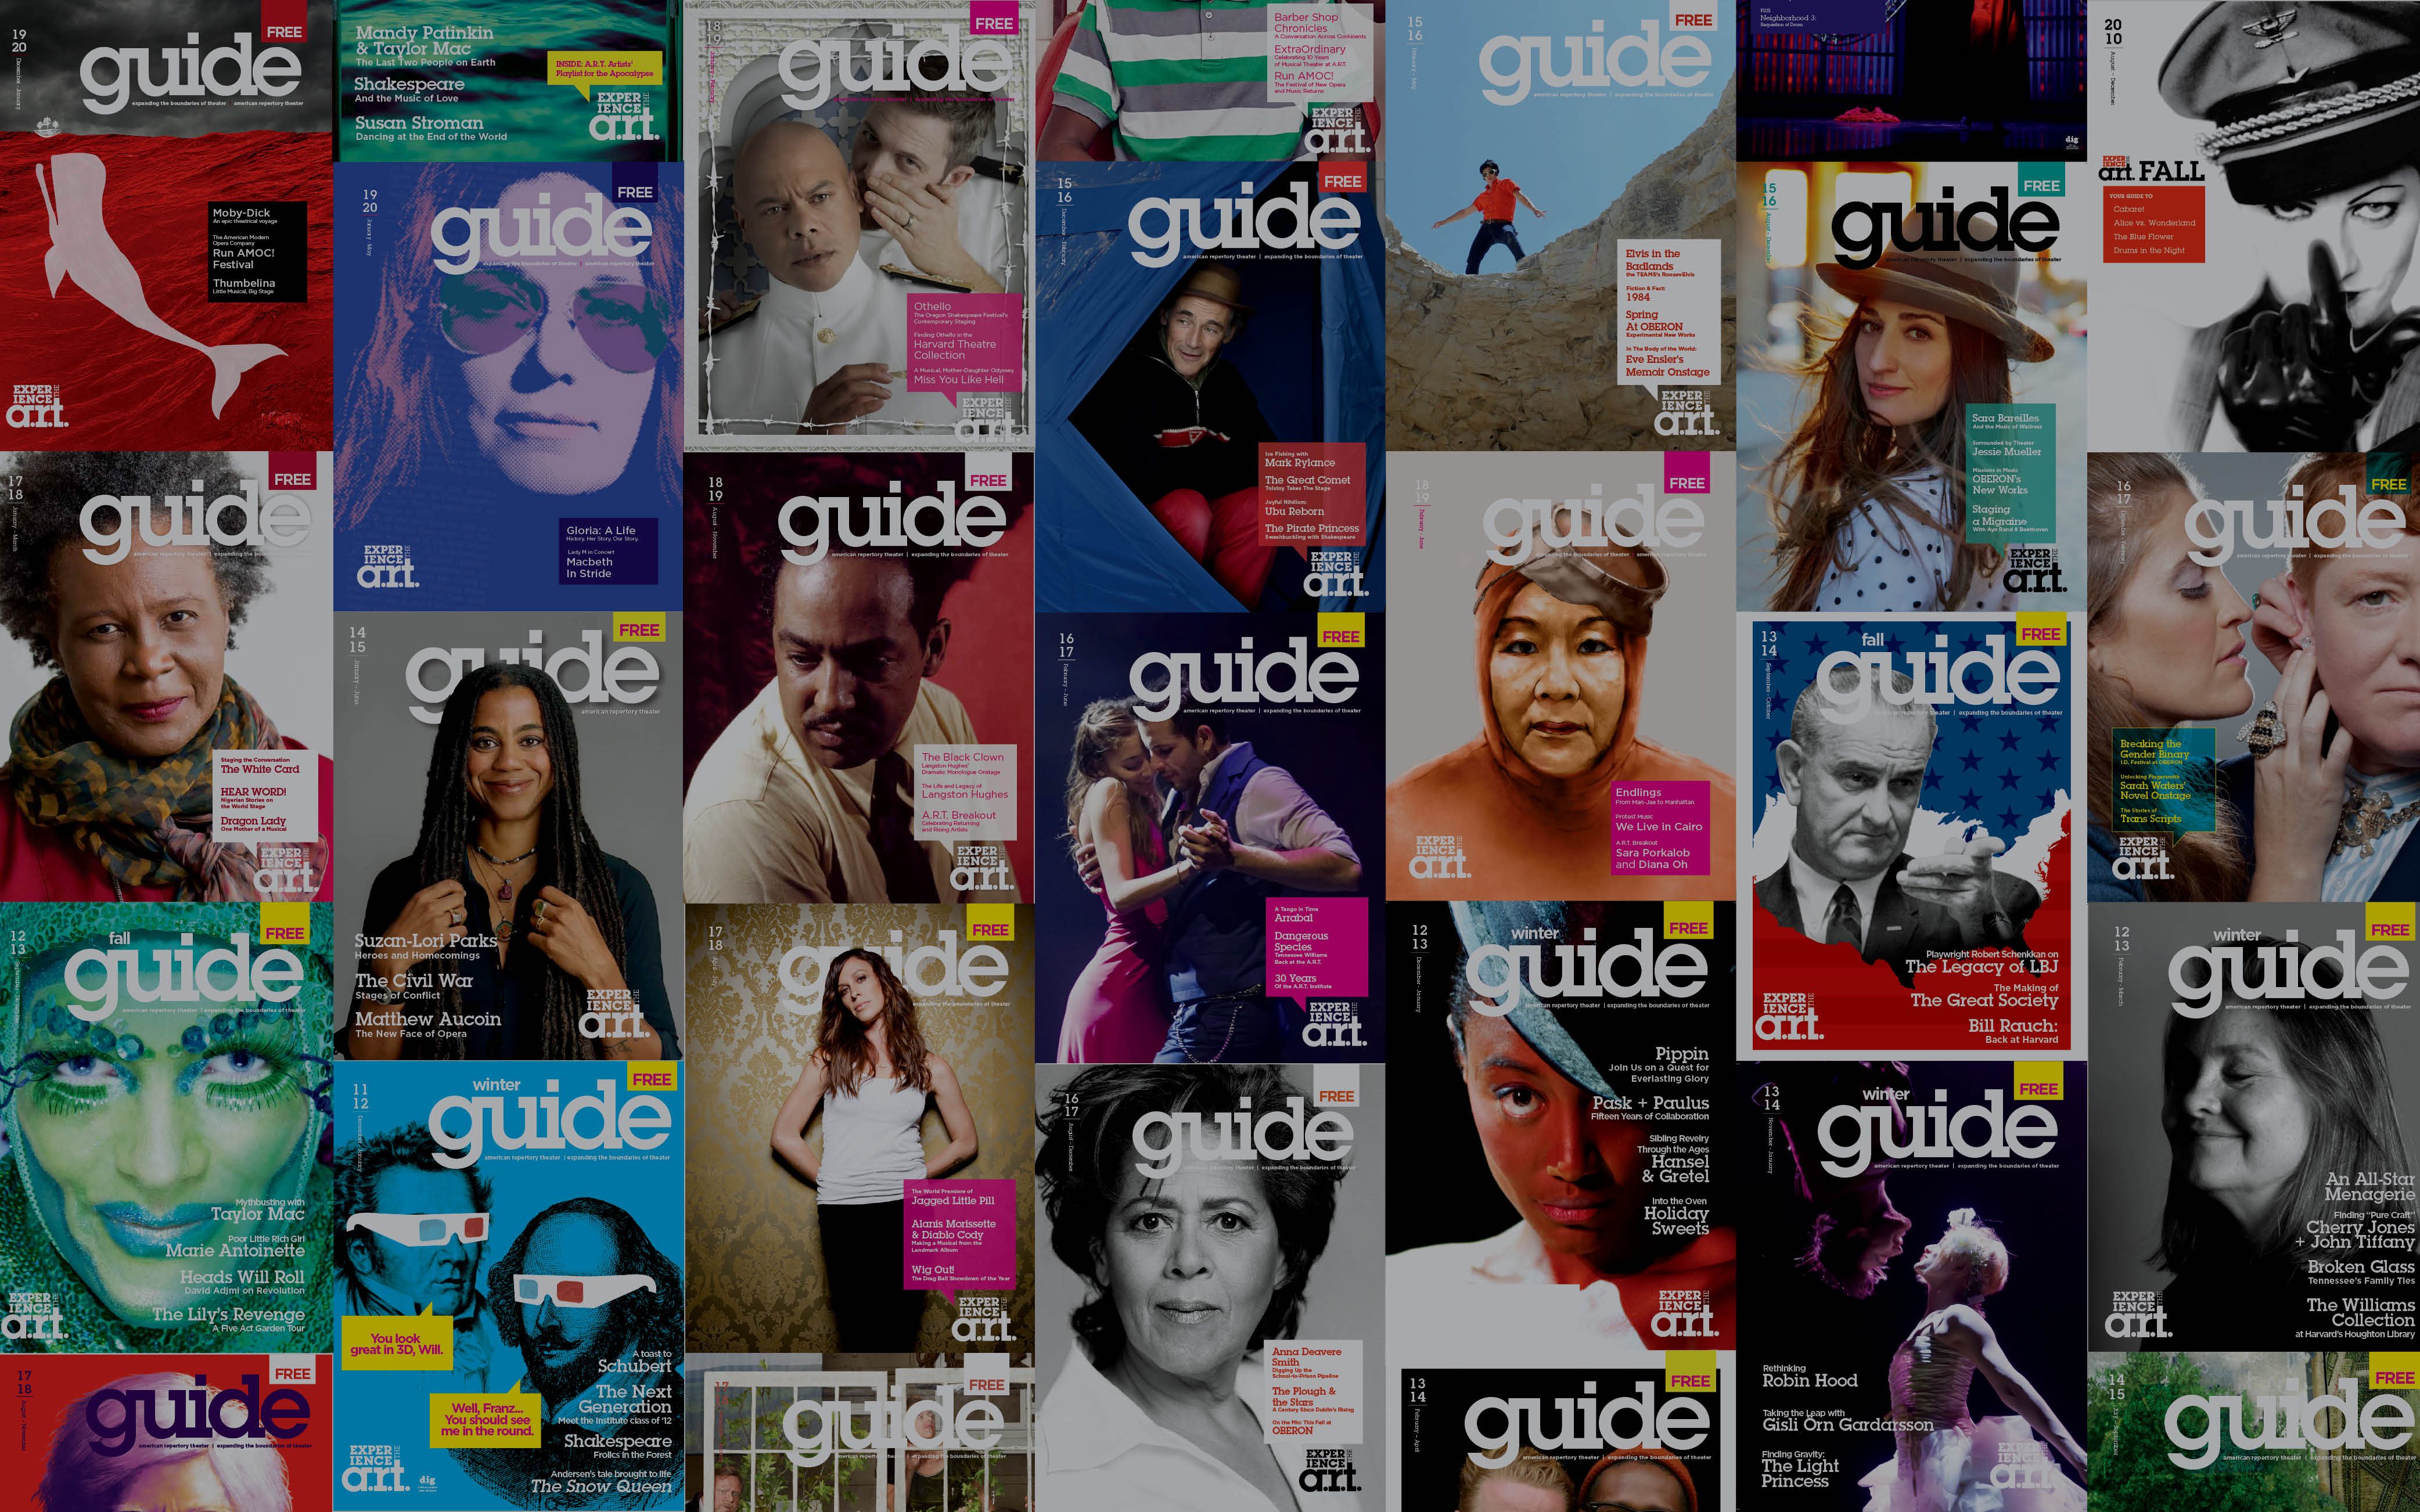 Collage of Guide Covers